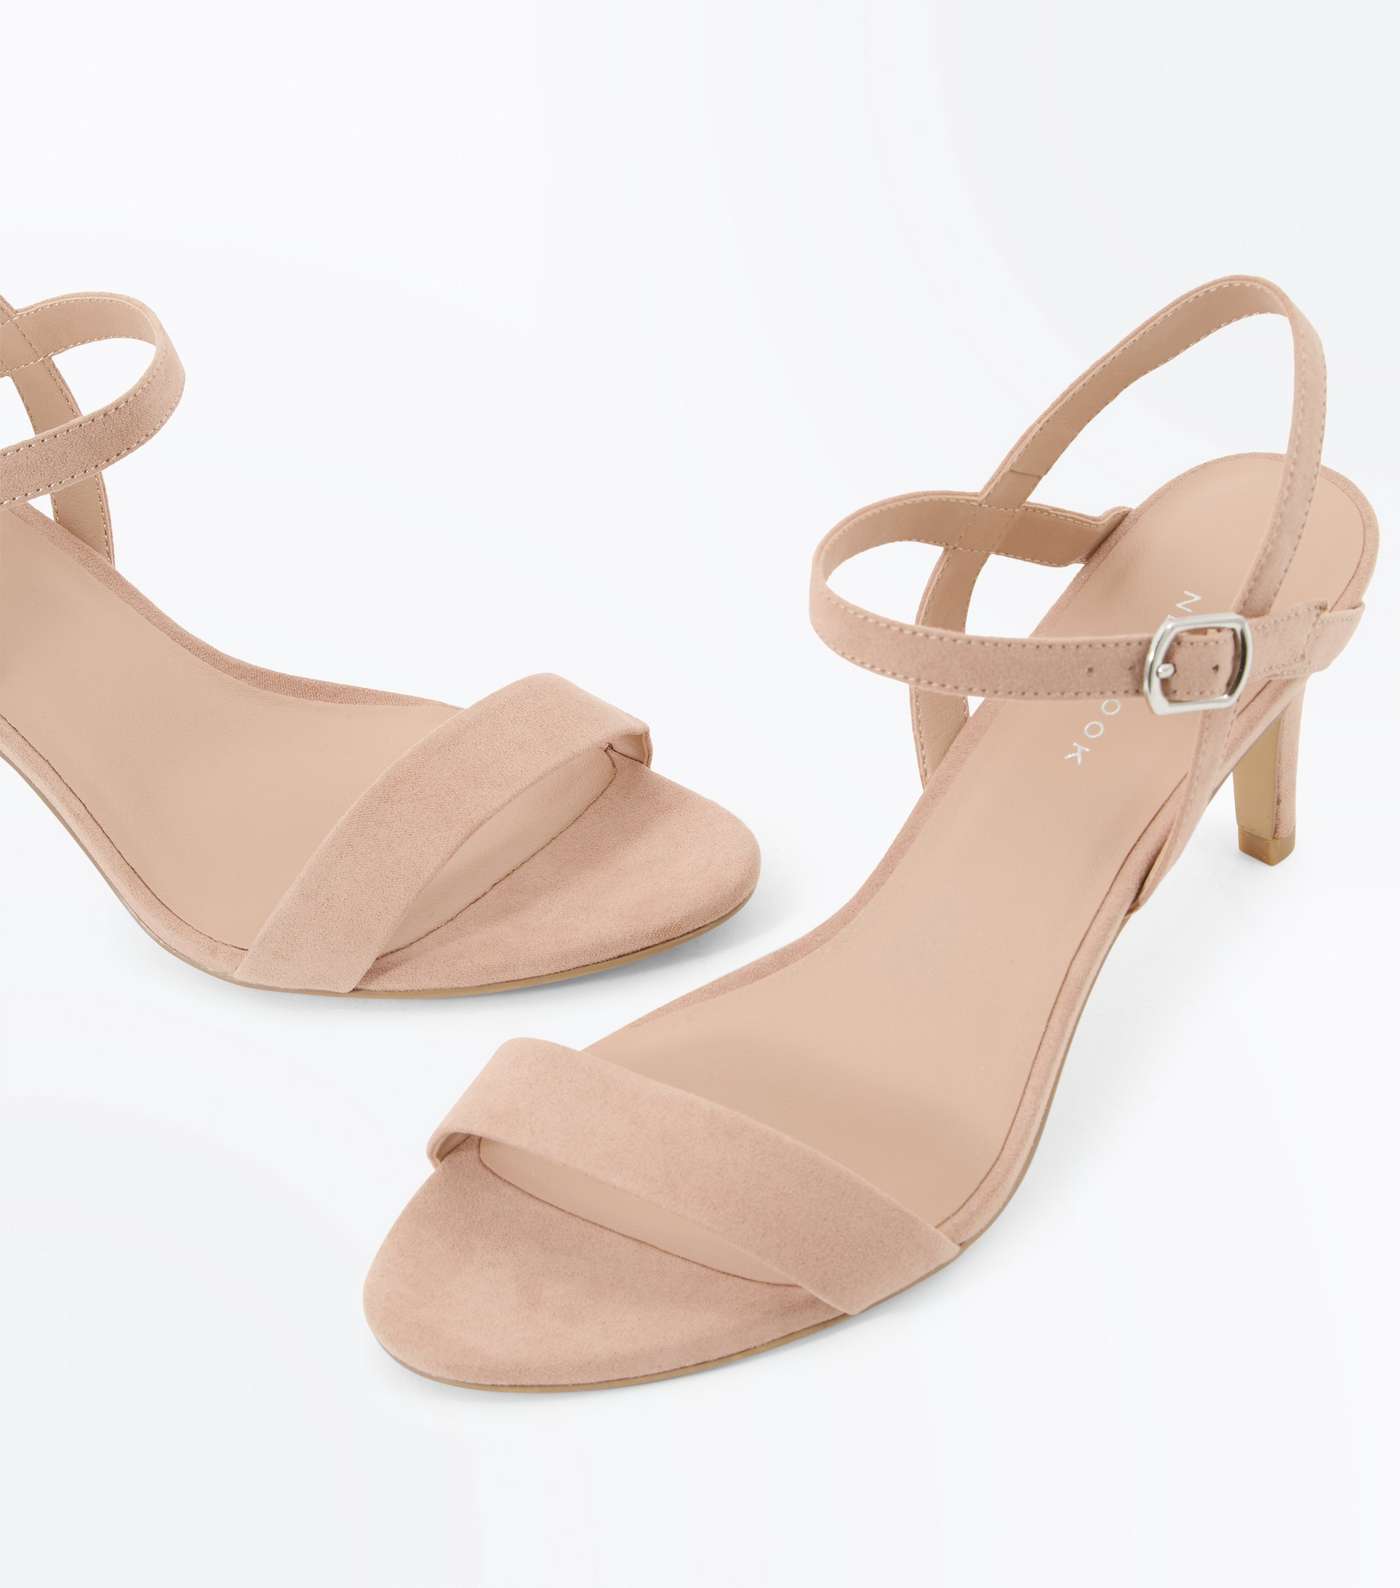 Nude Suedette Low Heeled Sandals Image 4